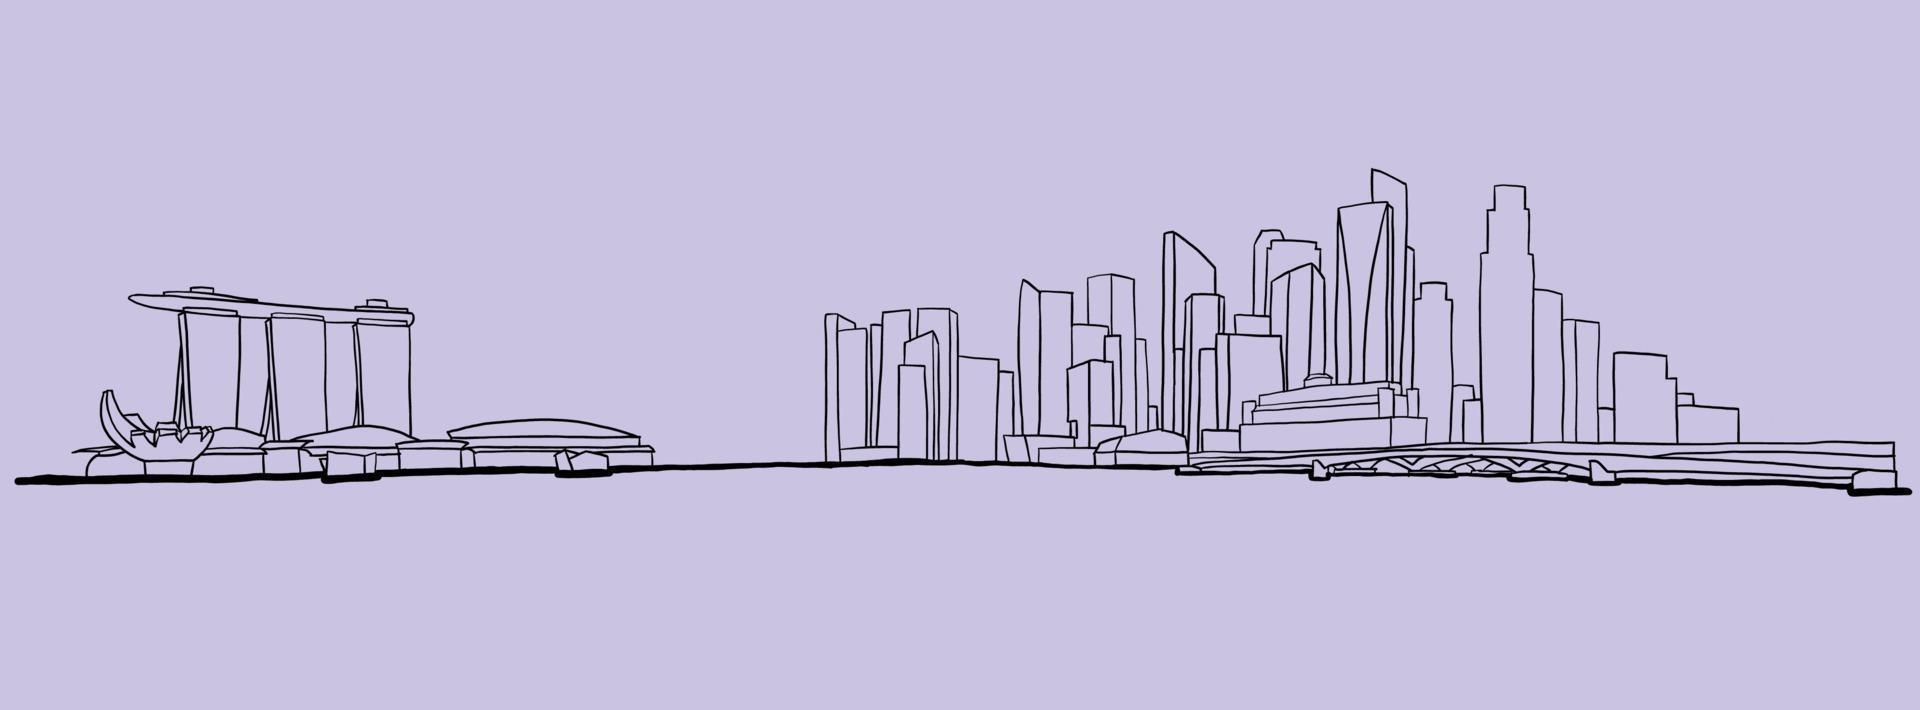 Singapore skyline freehand drawing sketch on white background. vector